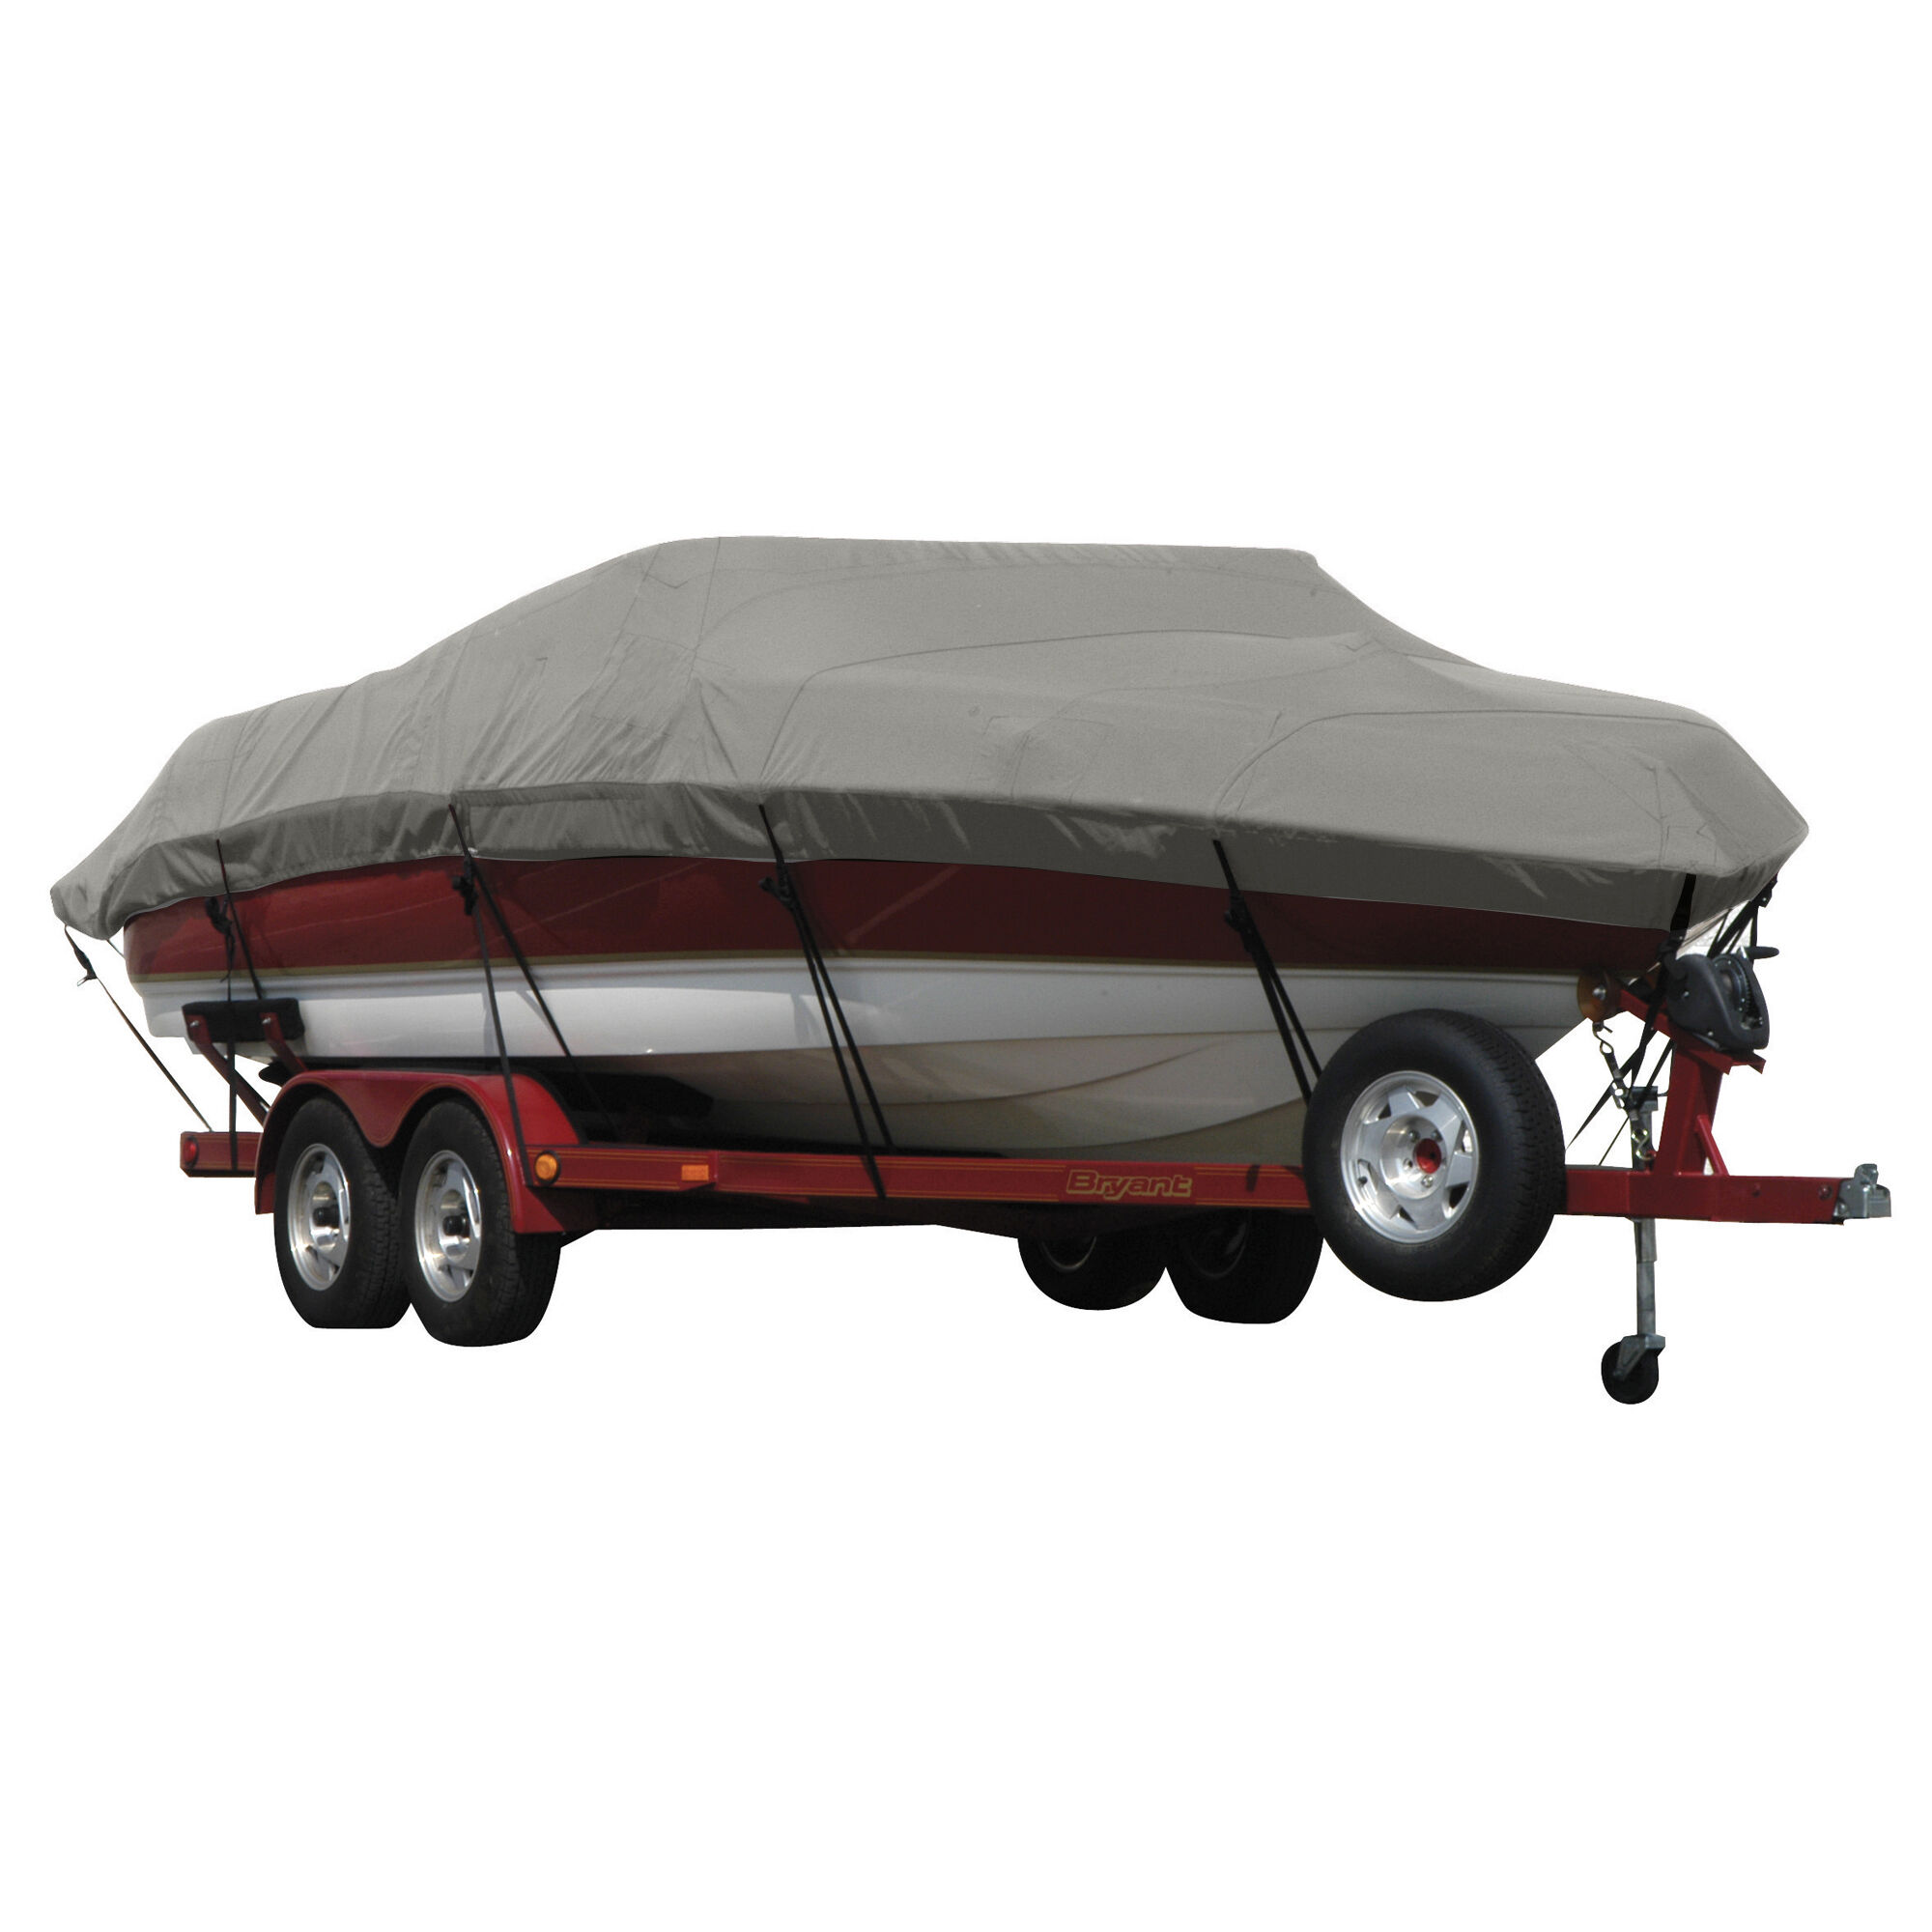 Covermate Exact Fit Sunbrella Boat Cover for Supreme 19 Cs 19 Cs Does Not Cover PLATFORMm. Charcoal Grey Heather in Charcoal Grey Heather